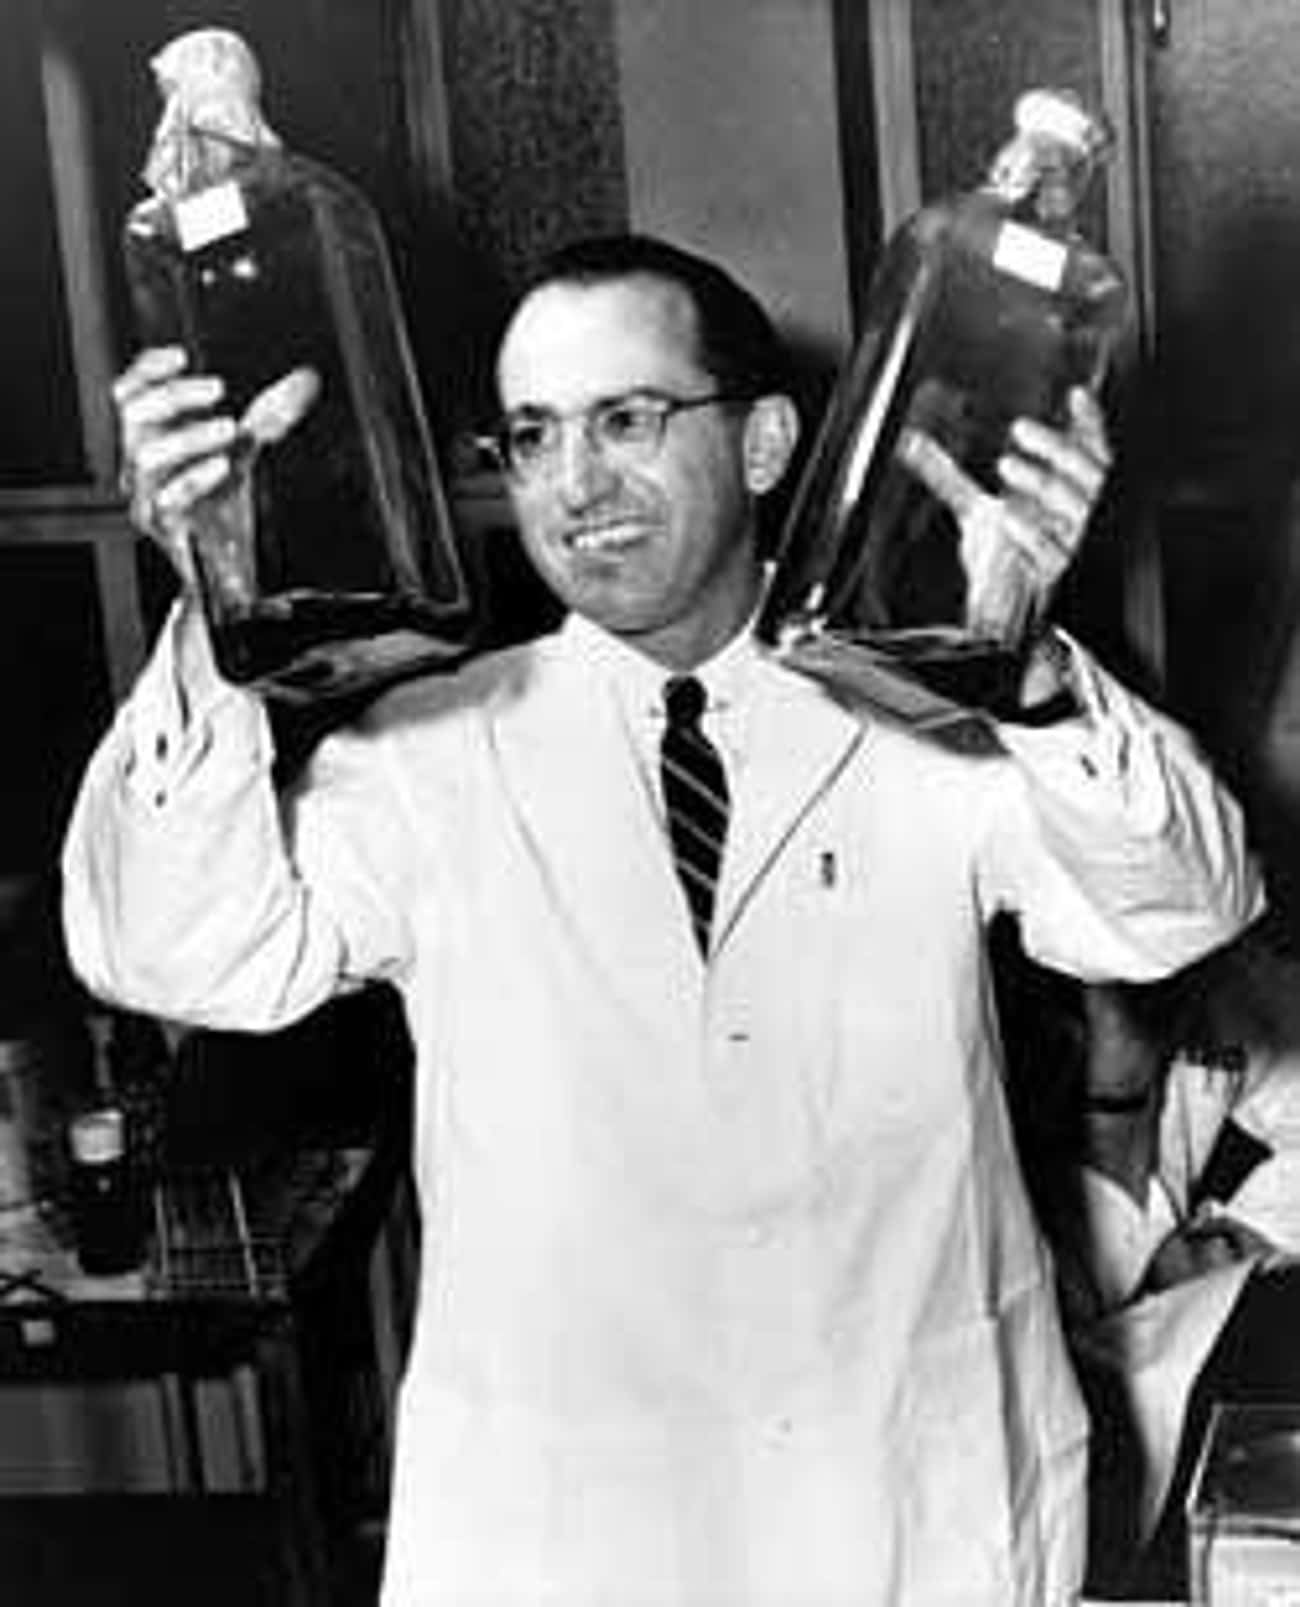 Jonas Salk Developed The Polio Vaccine, Protecting Billions Of People From A Feared Disease